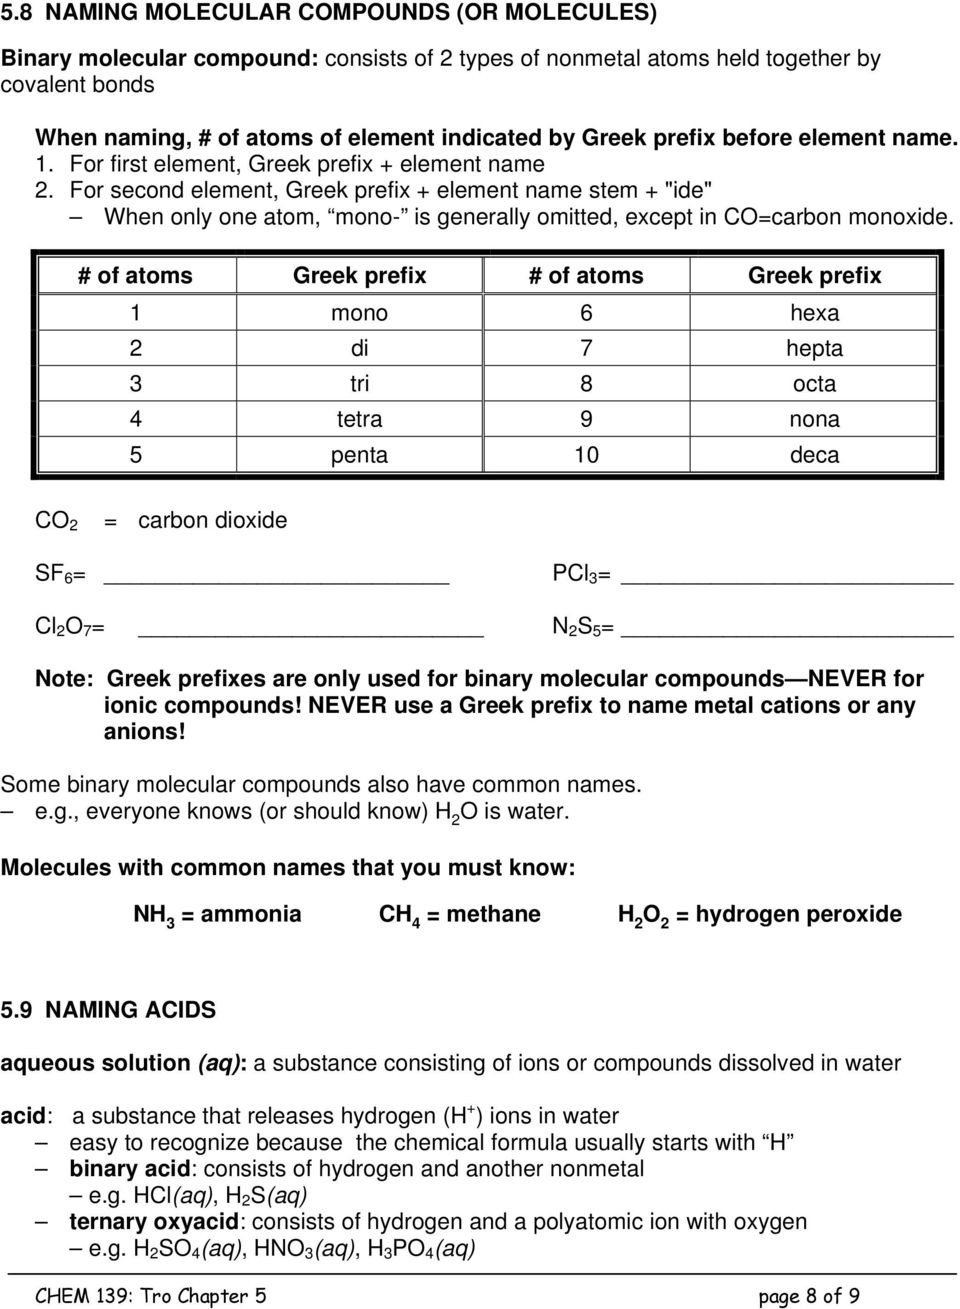 Molecules and Compounds Worksheet Chapter 5 Molecules and Pounds Pdf Free Download